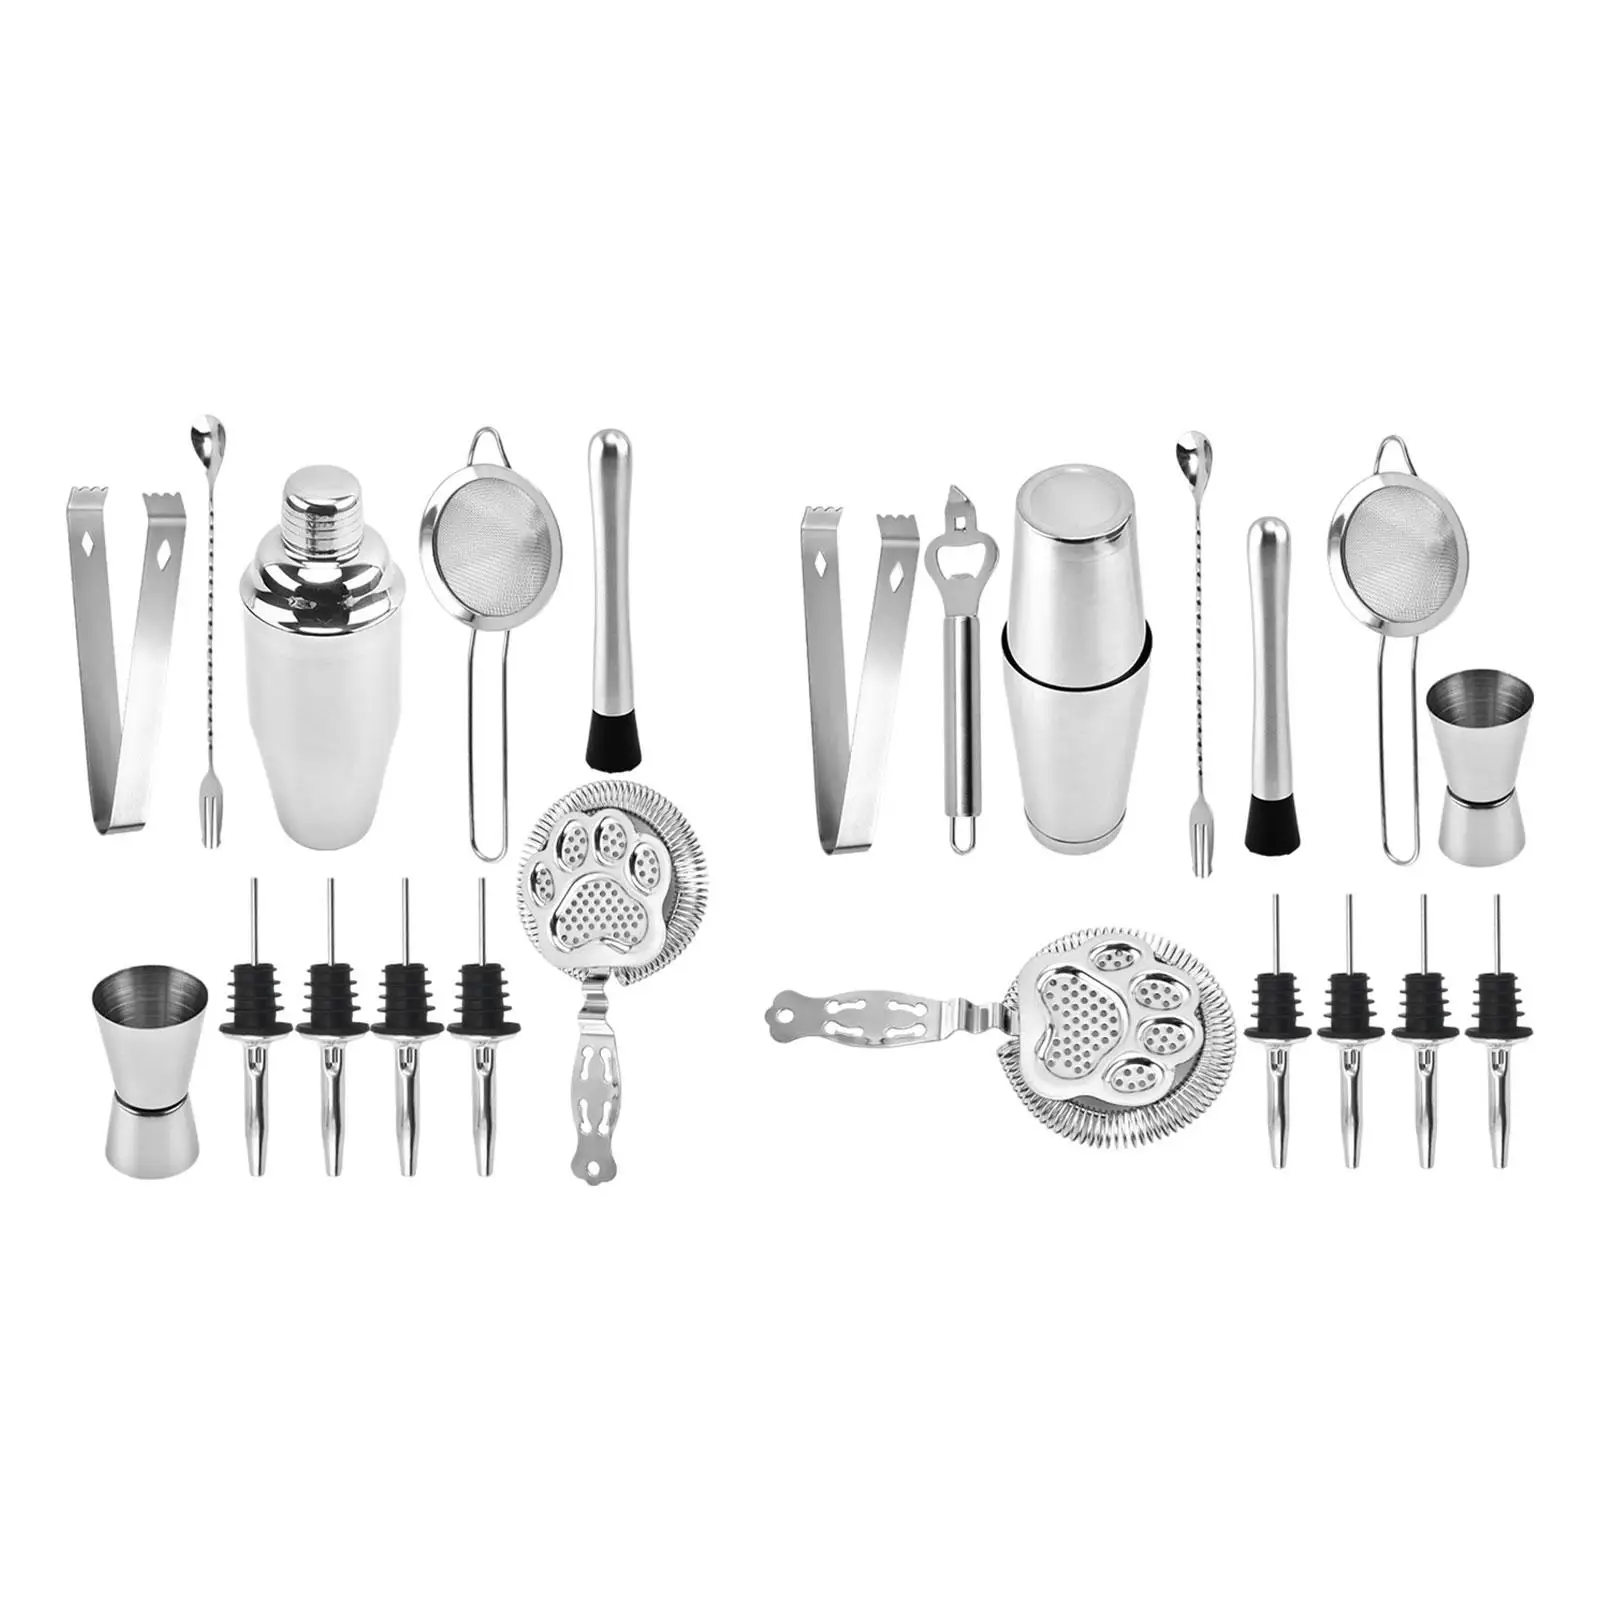 Barware Sets Martini Making Juice Making Kits for Bar Accessories Drink Home